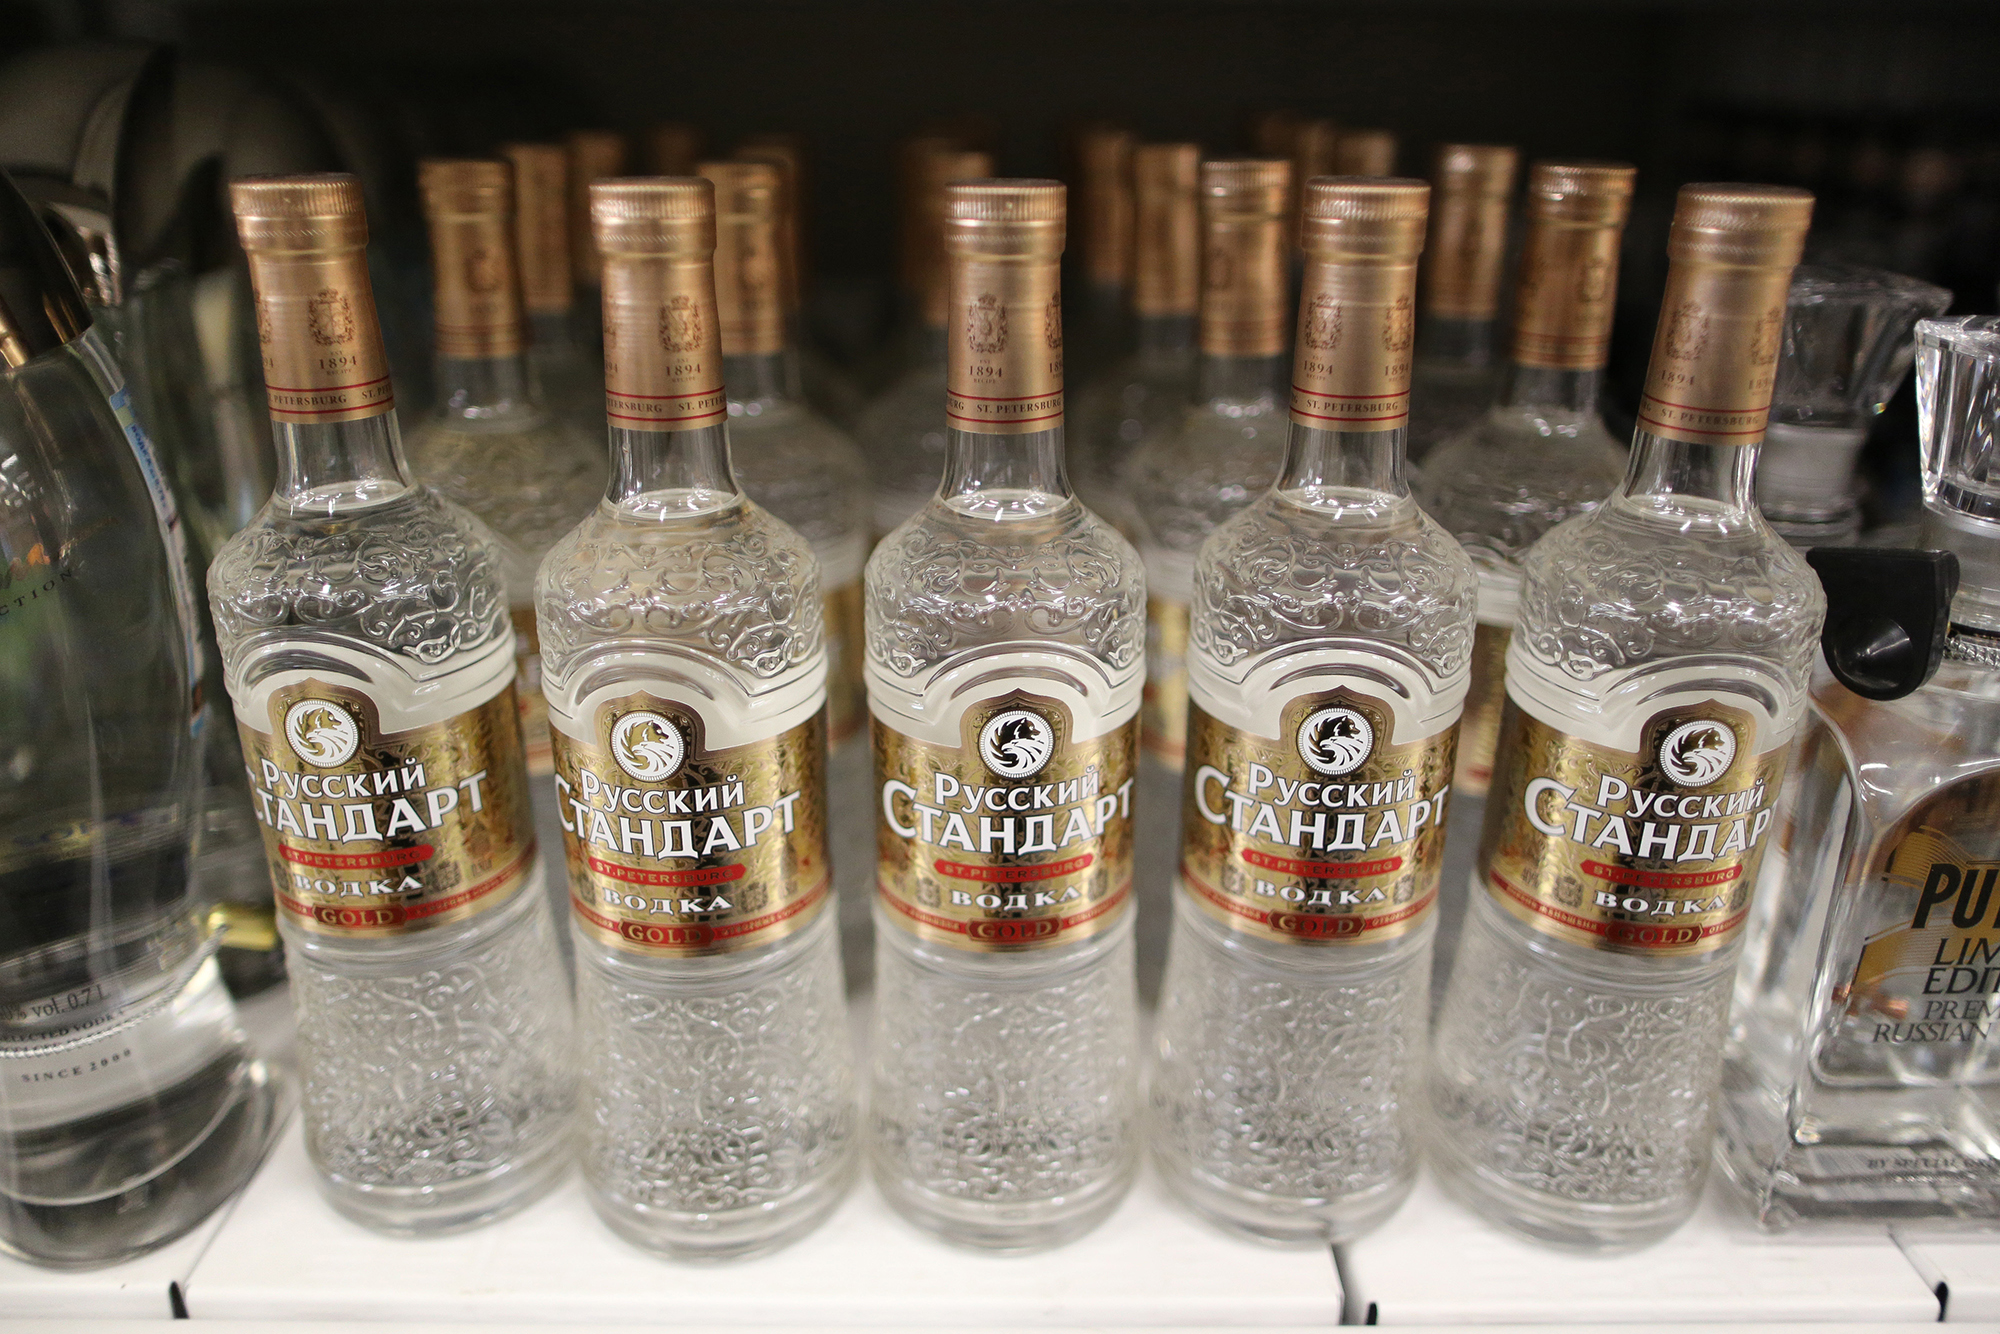 Russian Standard is the only Russian brand on Utah liquor store shelves....